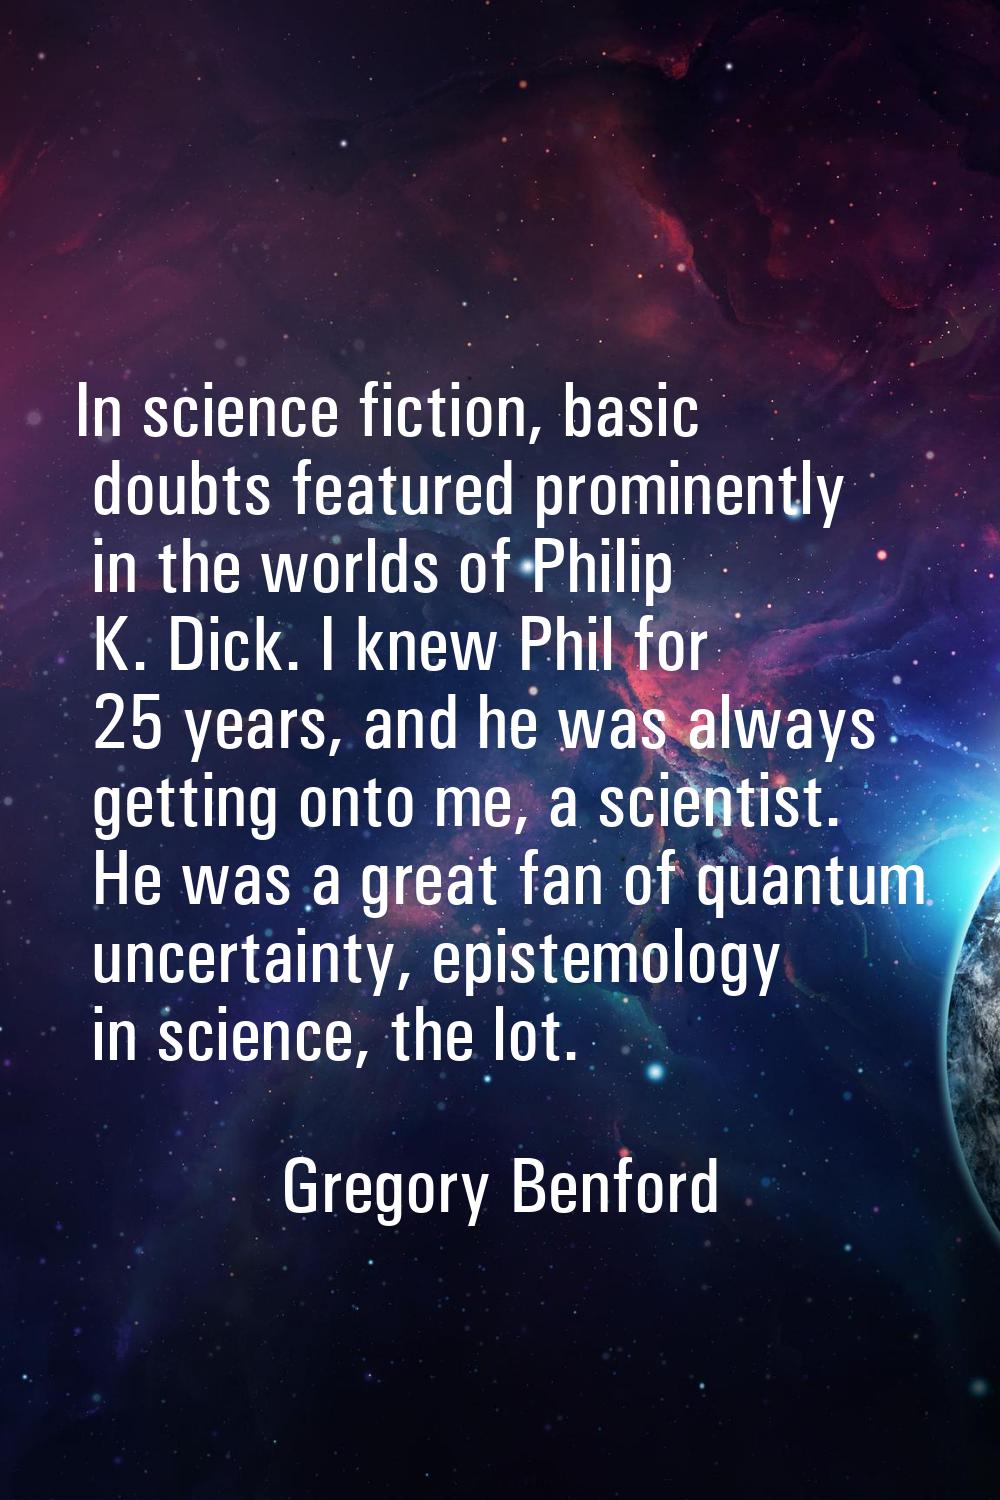 In science fiction, basic doubts featured prominently in the worlds of Philip K. Dick. I knew Phil 